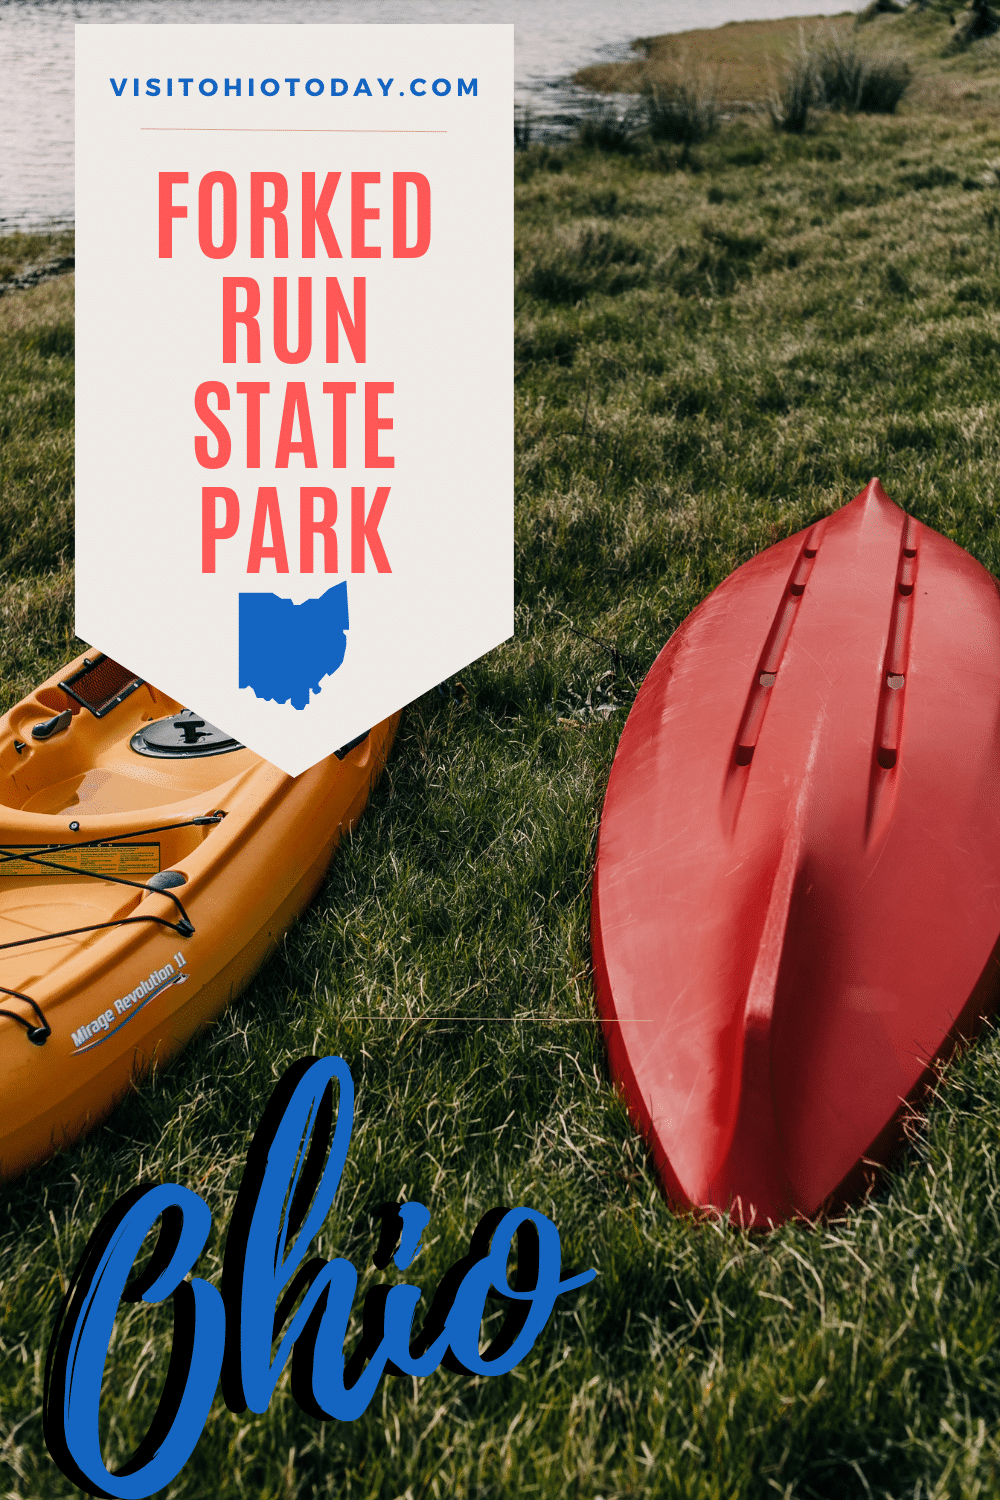 Forked Run State Park is an almost 800 acre state park located in Southeast Ohio. The Ohio state park is full of beautiful landscape, wildlife and history. #ohiostatepark #statepark #forkedrunstatepark #forkedrun #ohio